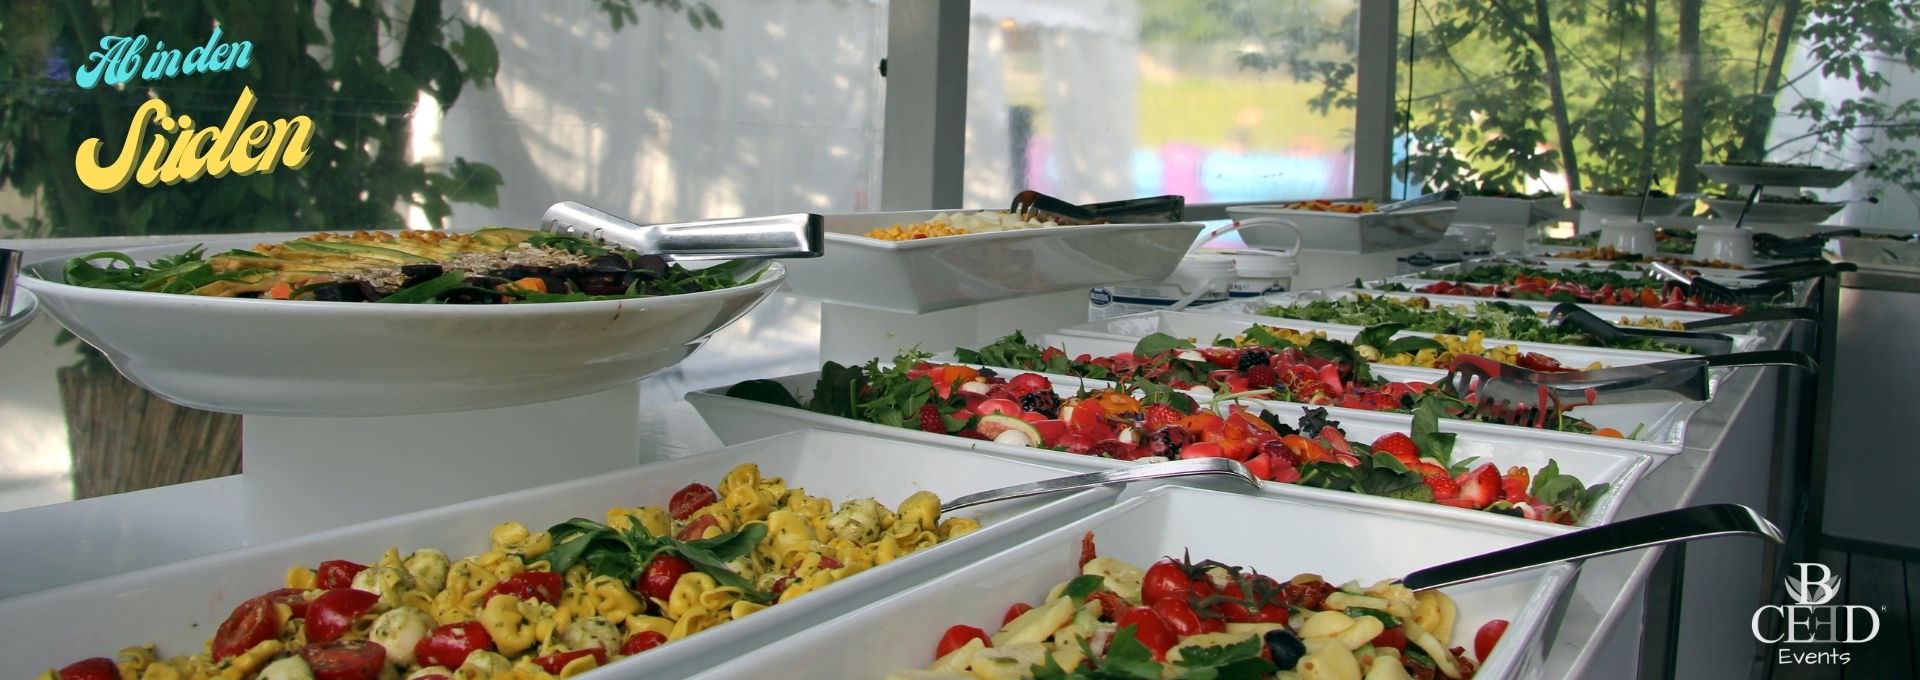 Summer party catering mobile - bceed event planning company